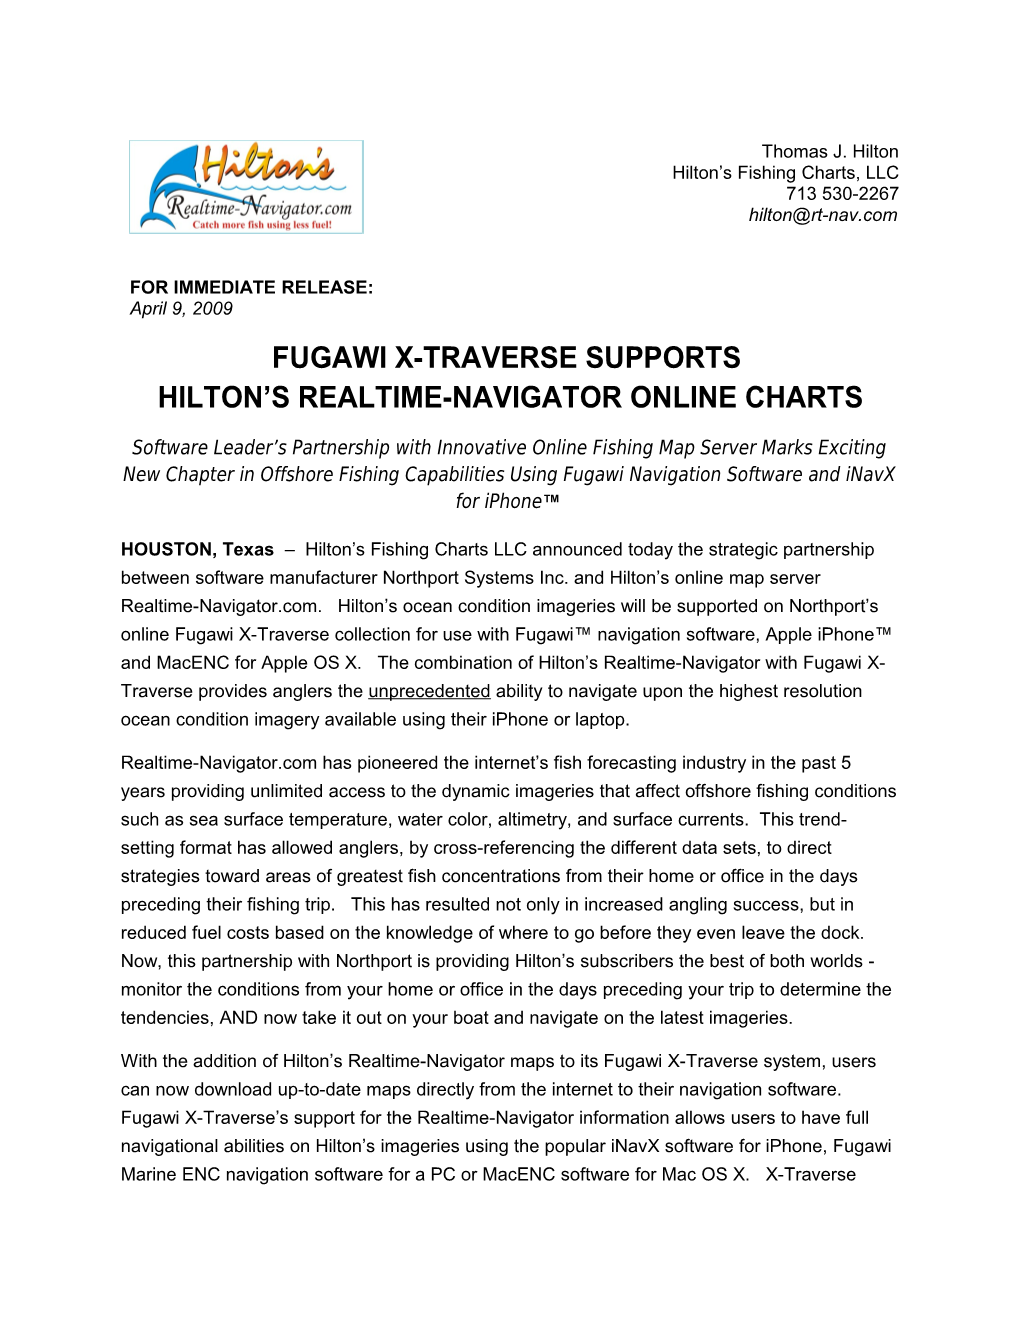 Fugawi X-Traverse Supports Hilton S Realtime-Navigator Online Charts